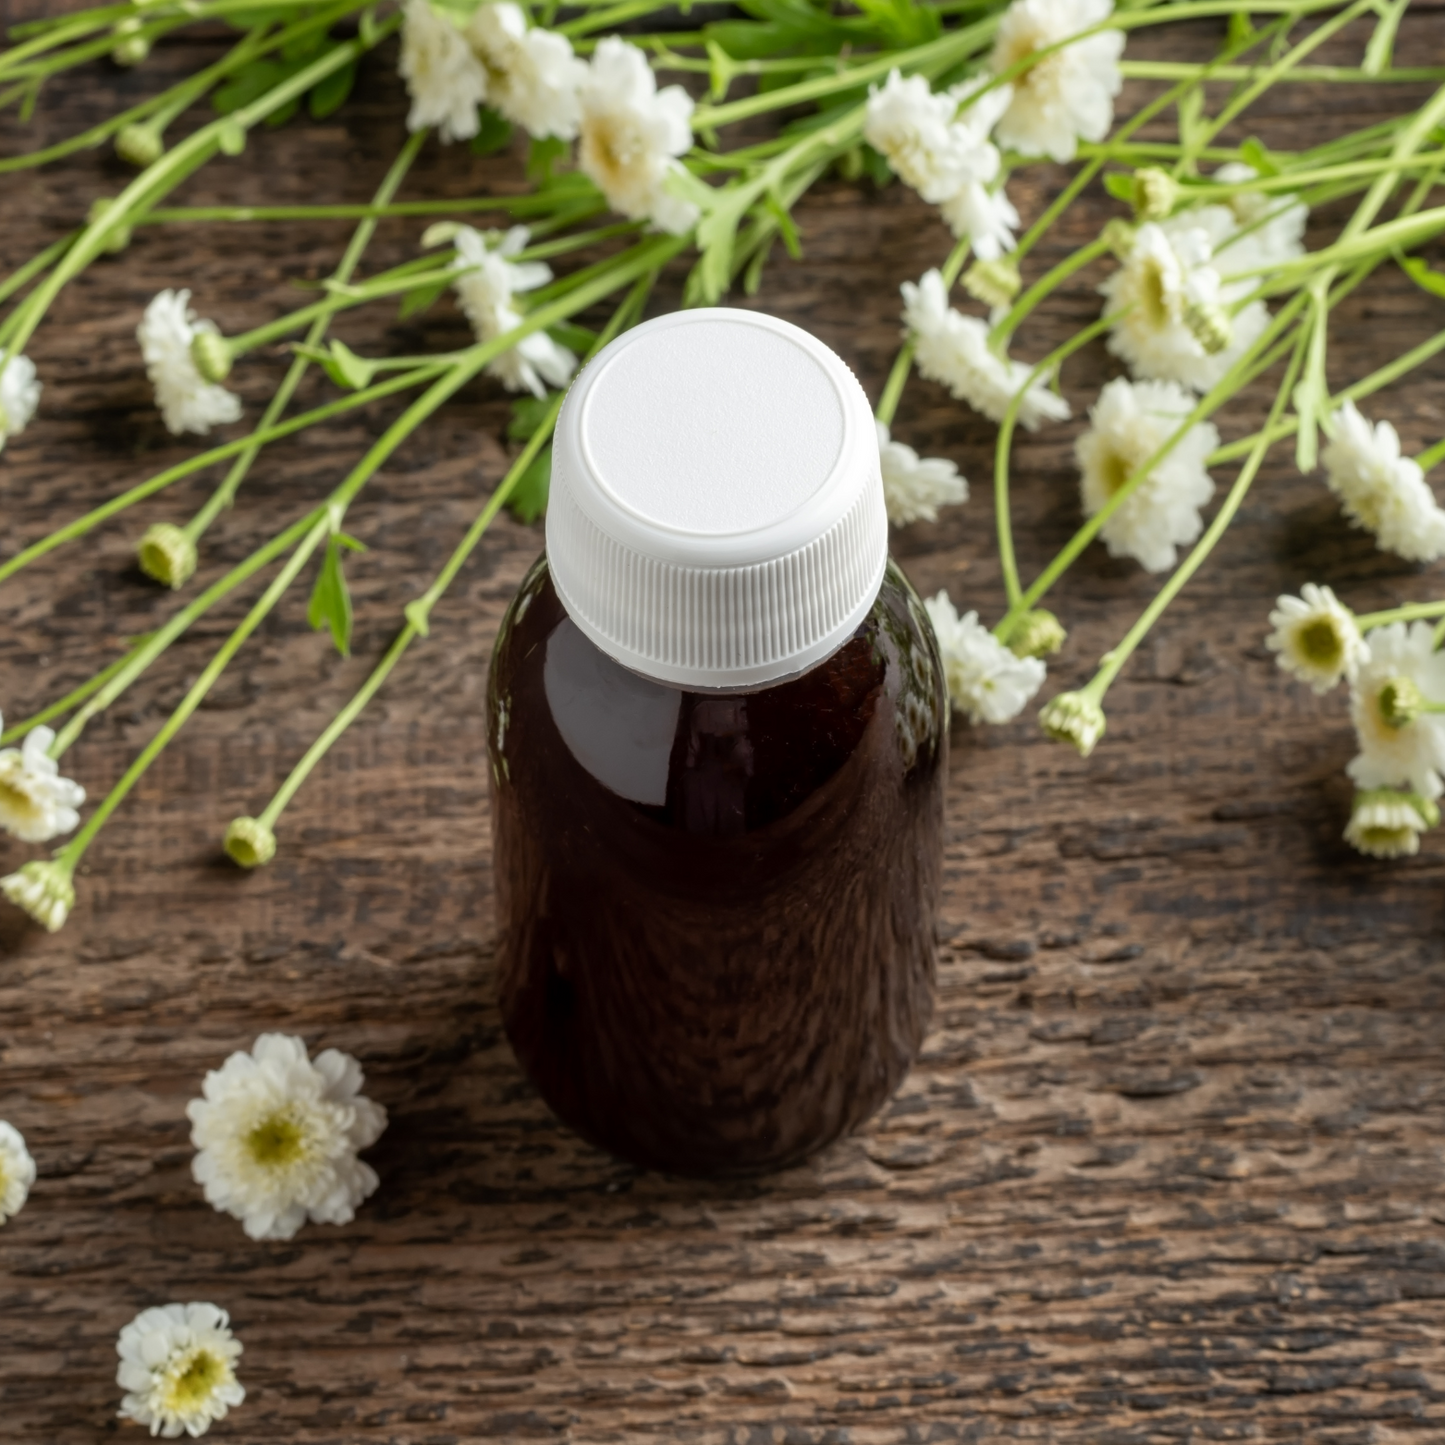 Feverfew Herb For Protection Rituals from Disease